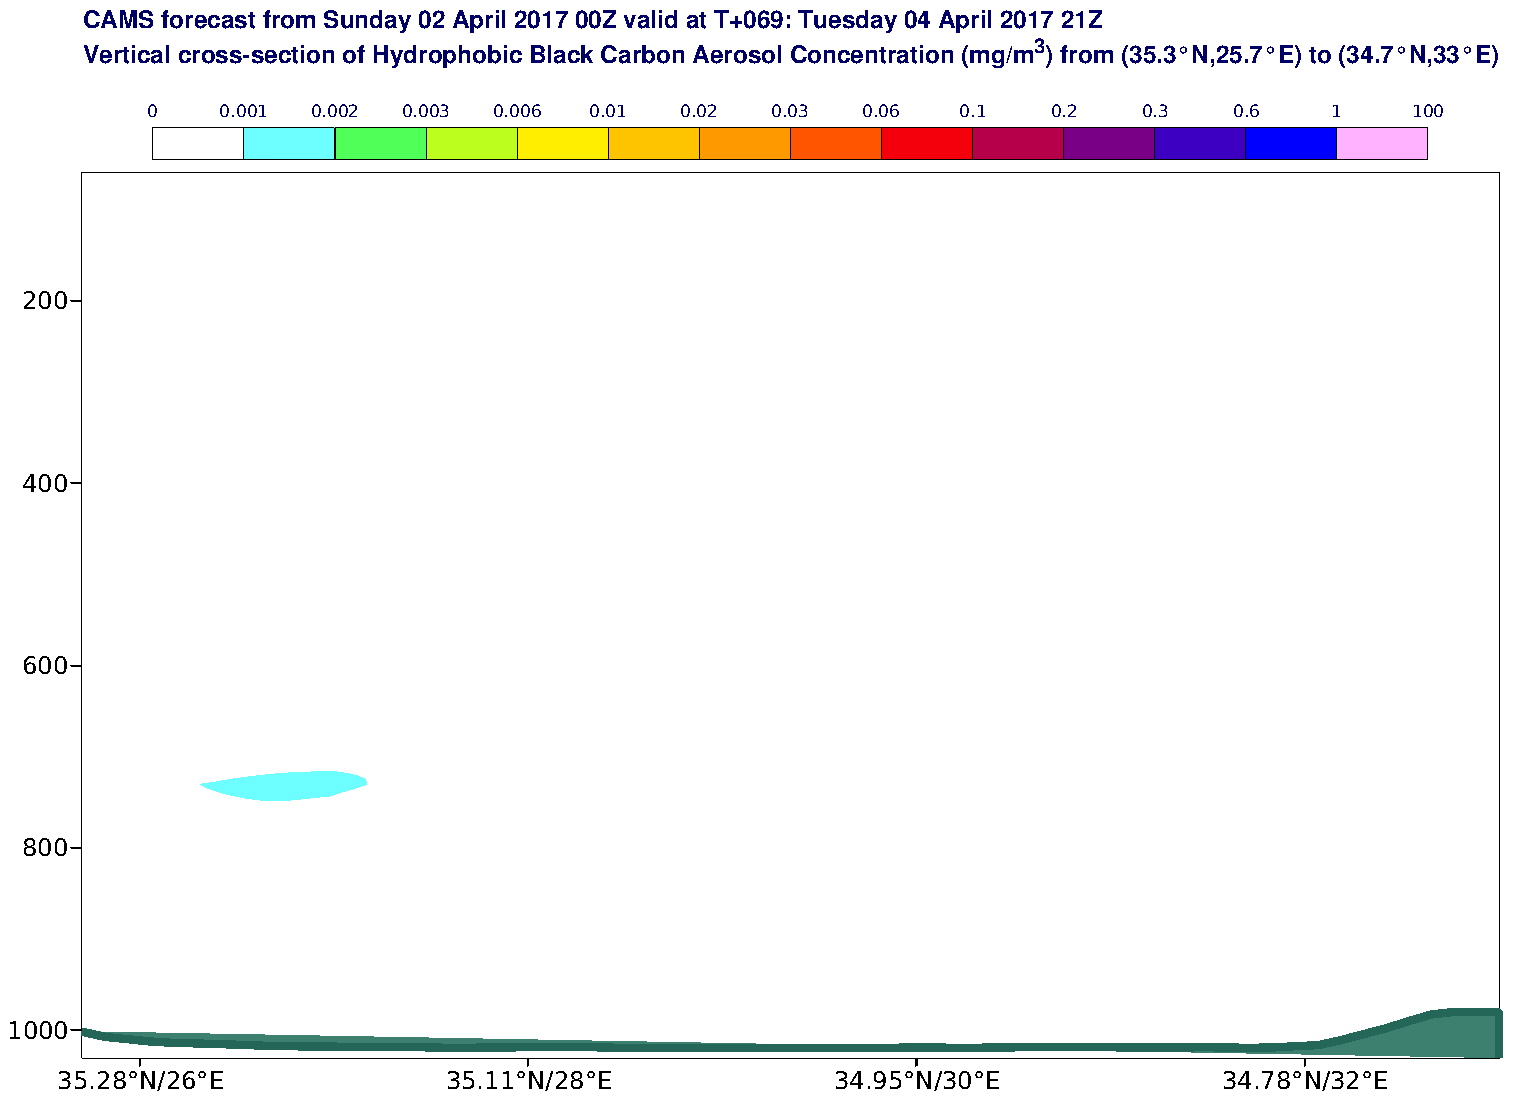 Vertical cross-section of Hydrophobic Black Carbon Aerosol Concentration (mg/m3) valid at T69 - 2017-04-04 21:00